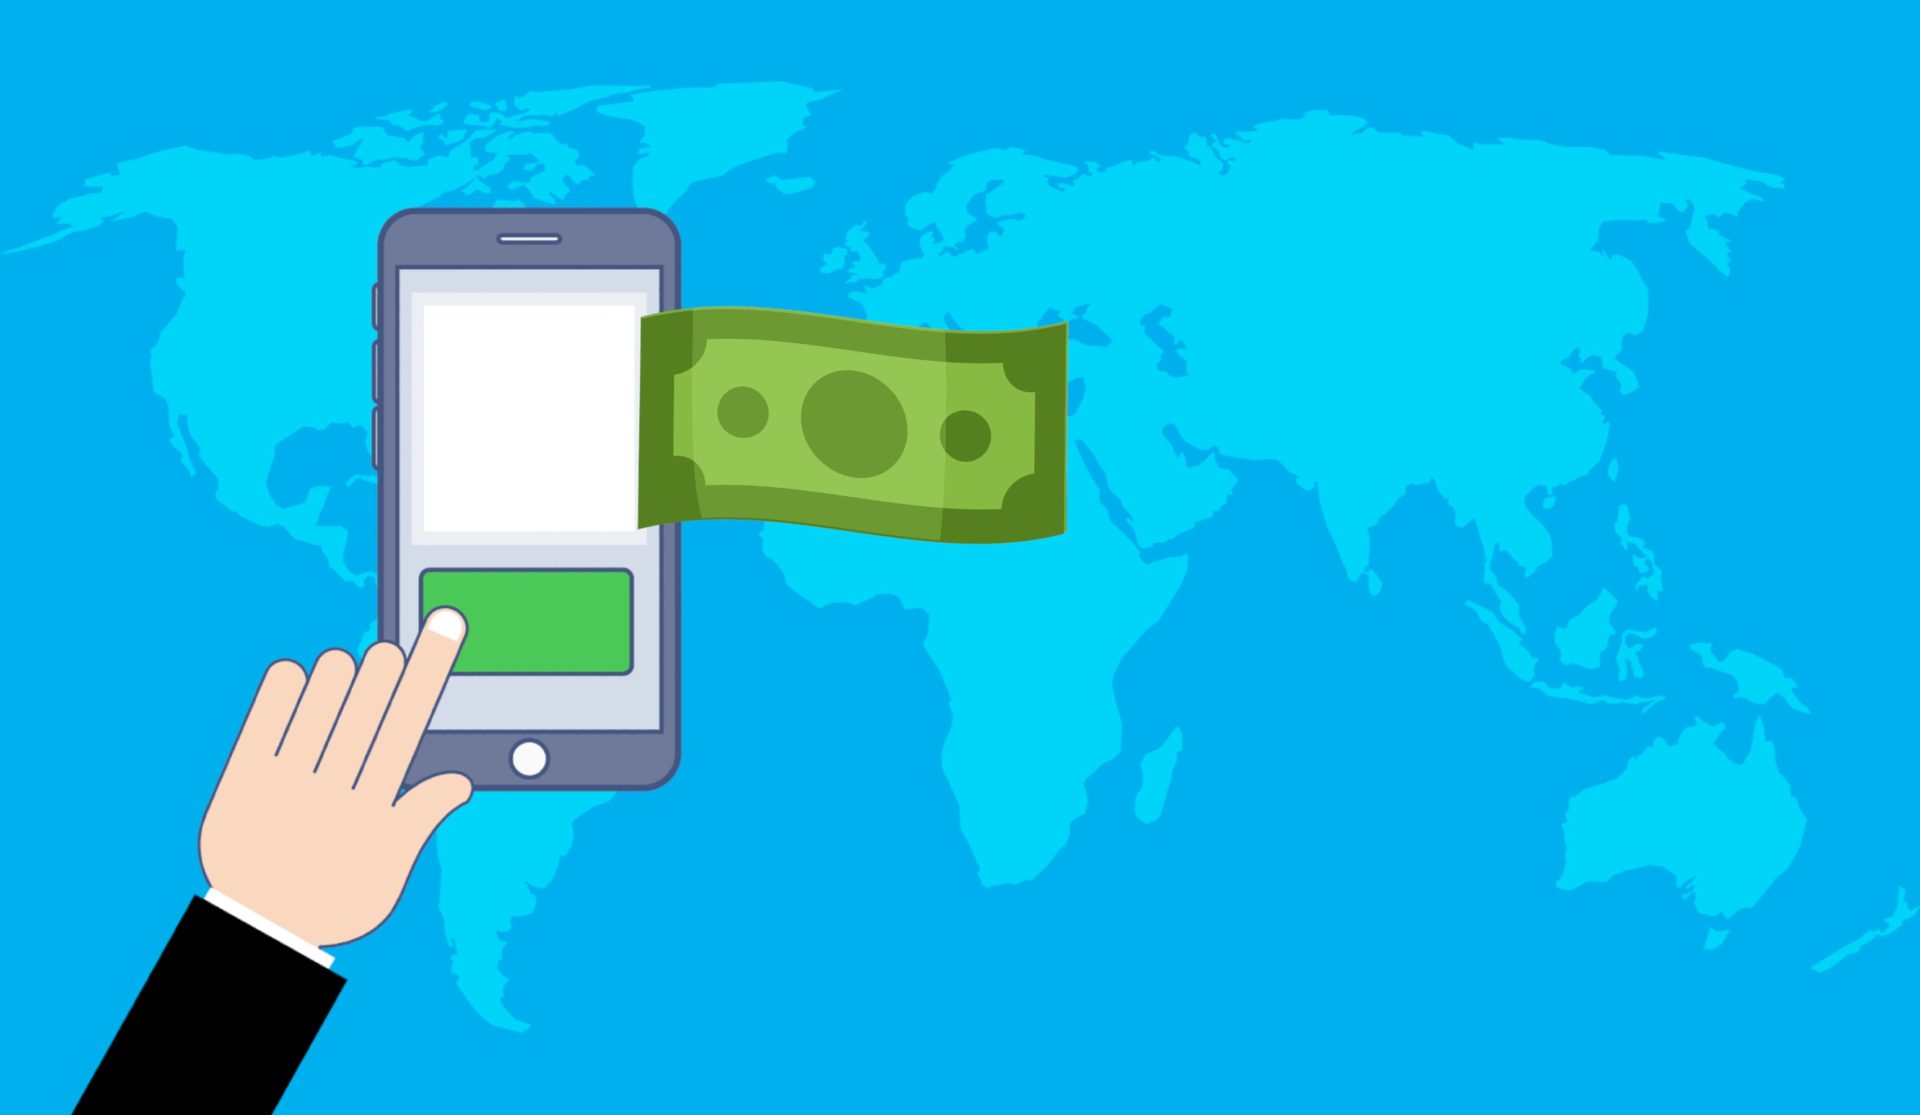 graphic showing mobile banking around the globe. A large phone positioned over a world map with a hand touching the screen indicating money being transferred.